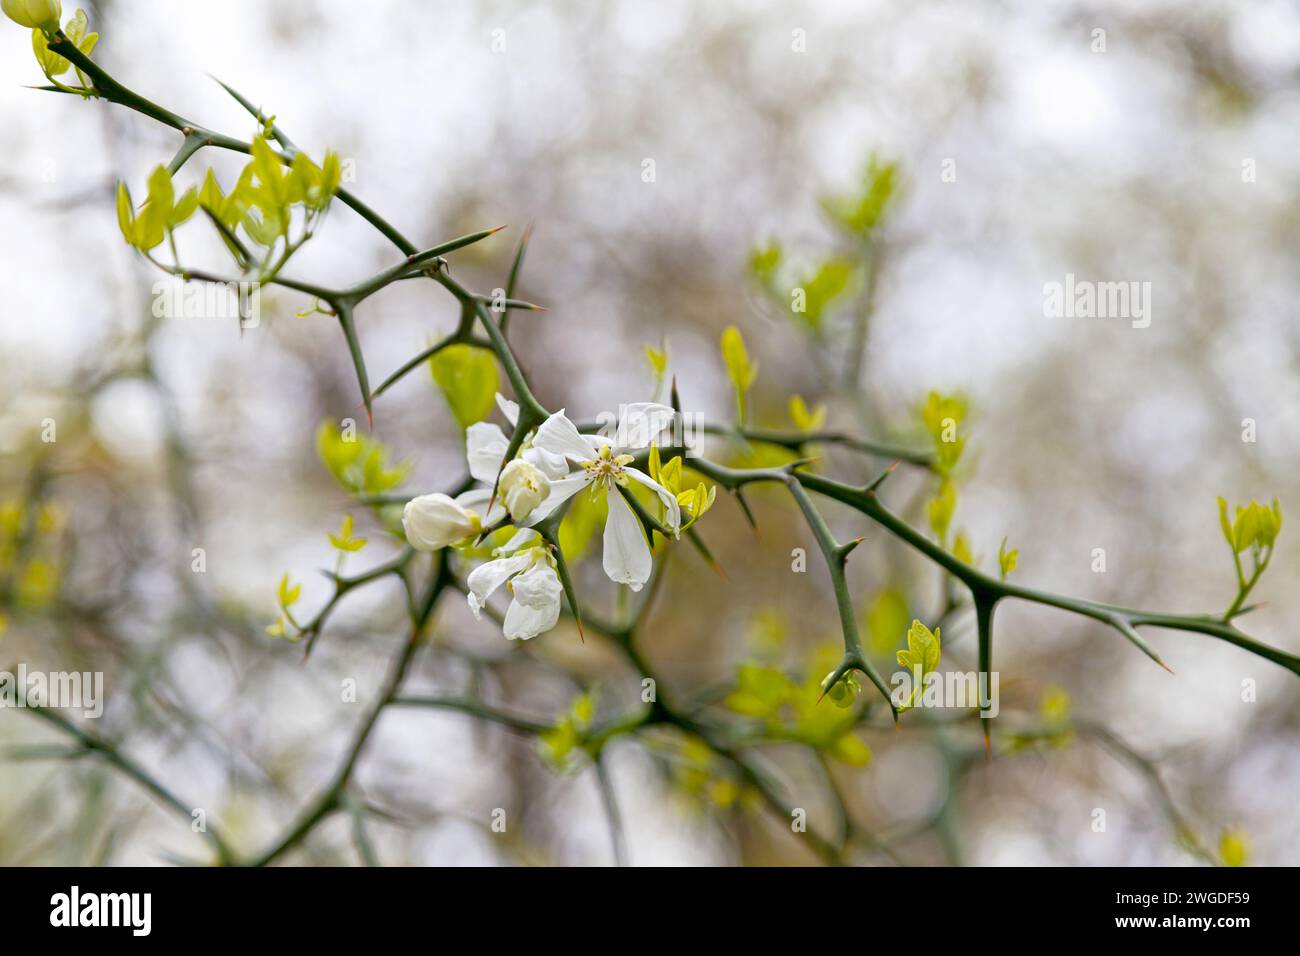 Close-up on the flowers of a Poncirus trifoliata (also known as trifoliate orange or Citrus trifoliata). It is a member of the family Rutaceae. Stock Photo